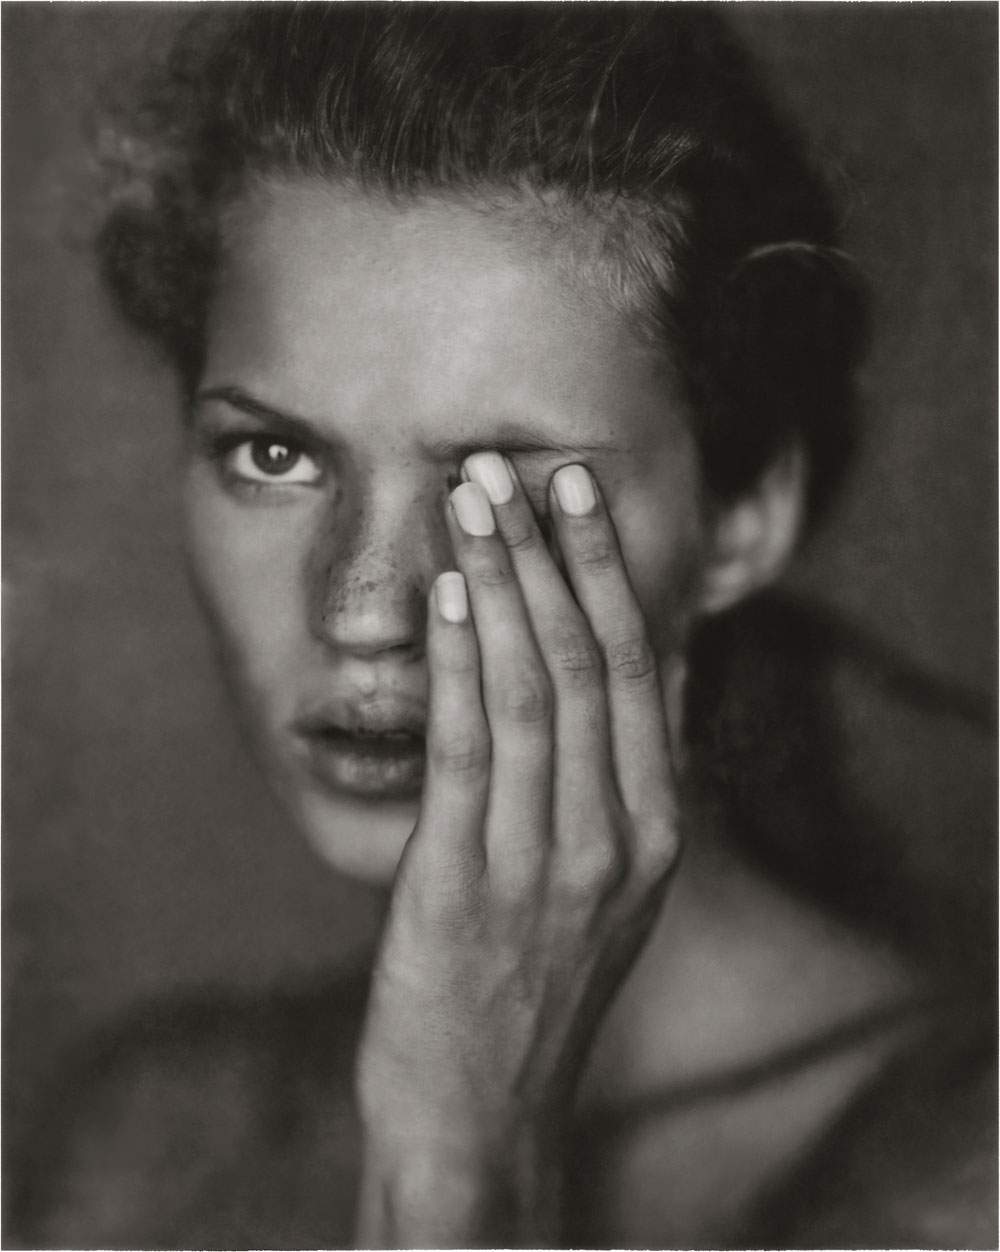 Paolo Roversi's fashion photographs on display at the MAR in Ravenna